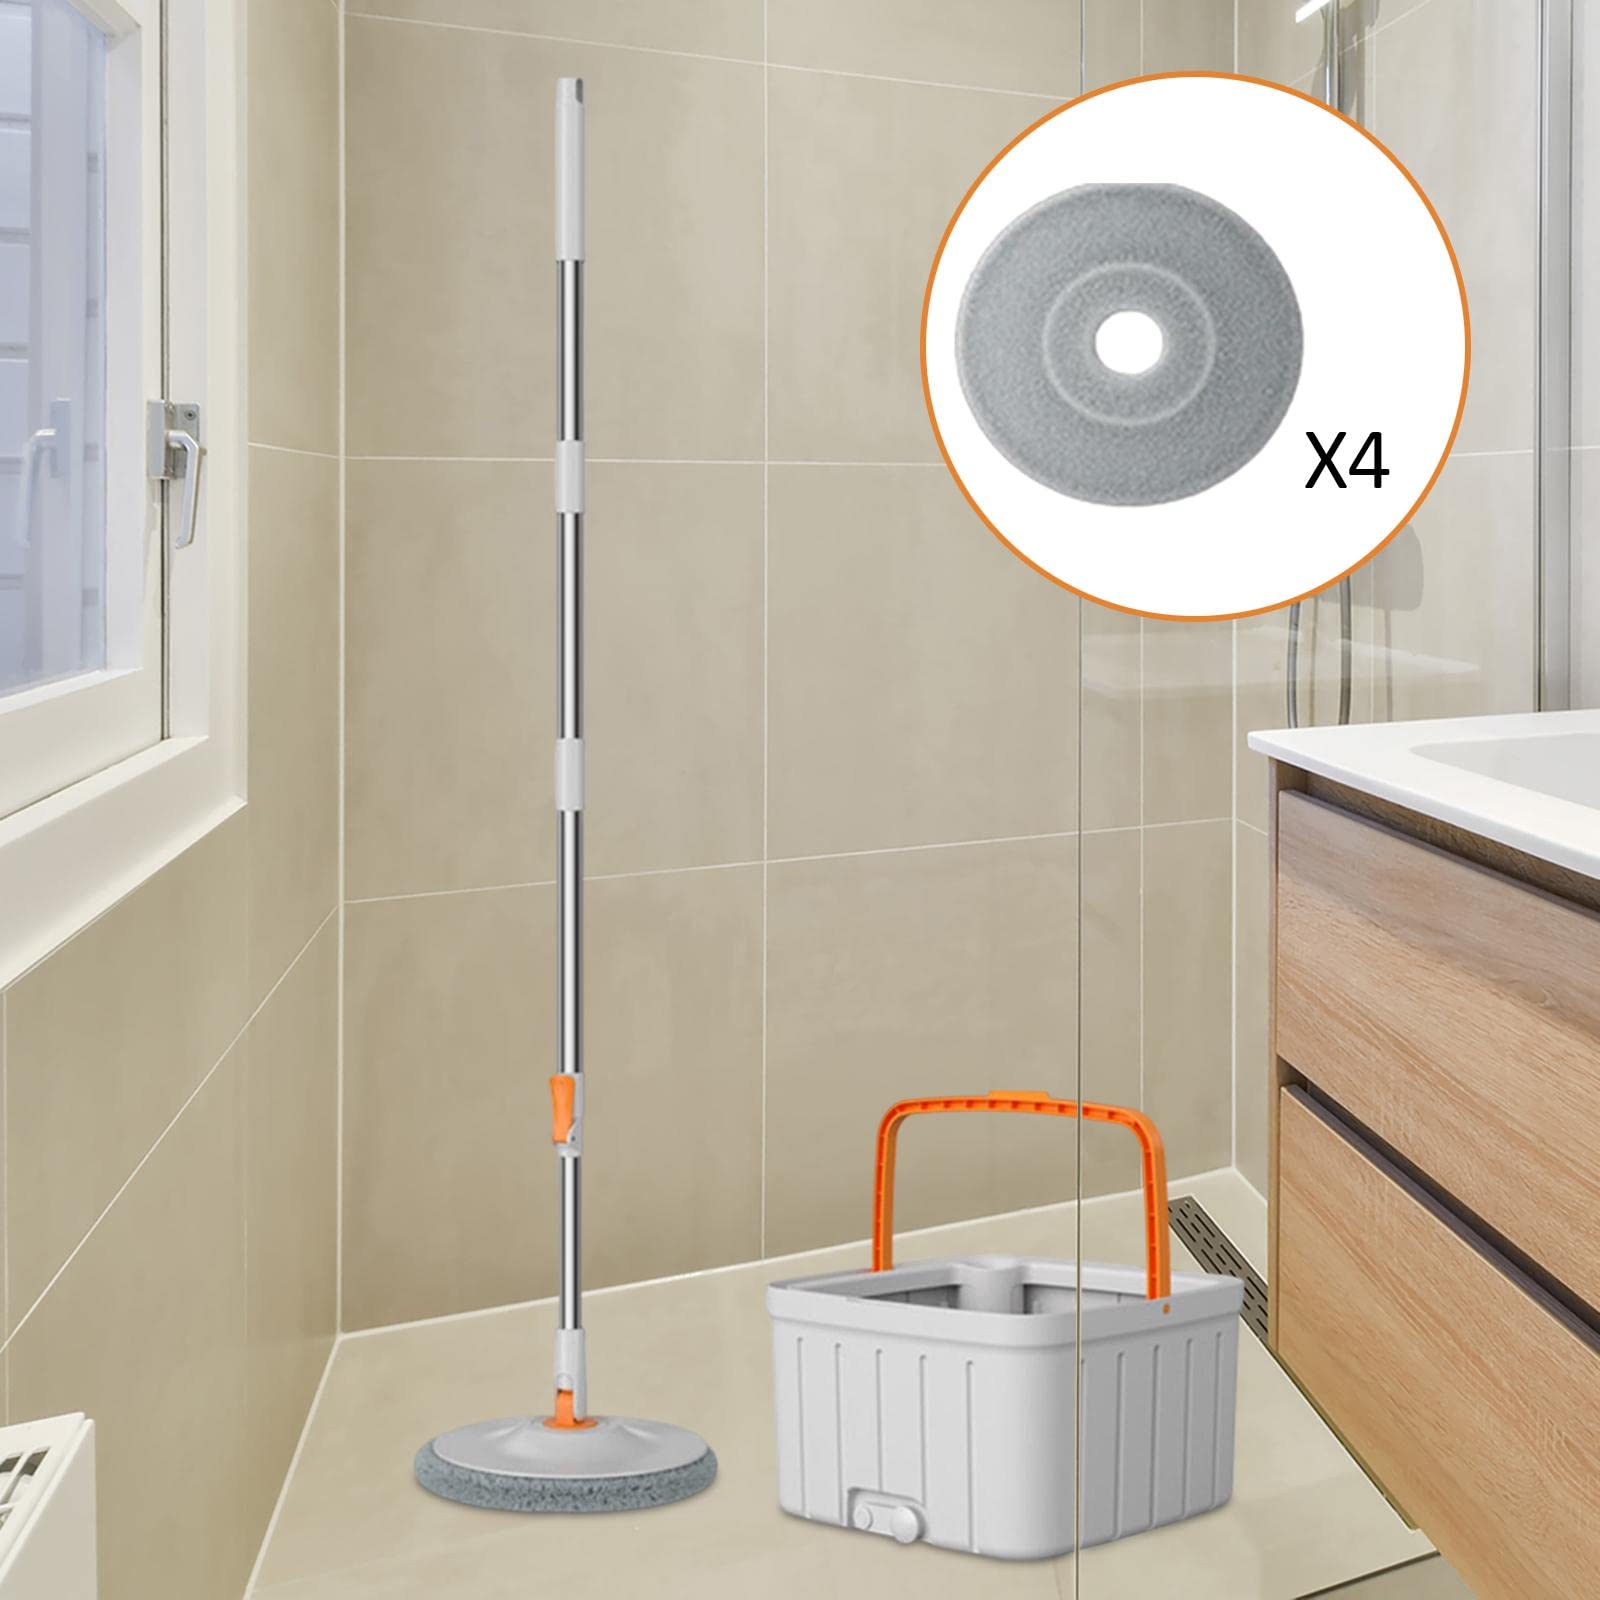 ＫＬＫＣＭＳ Rotatable Round Flat Floor Mop Bucket Set Rotating Mop Durable Telescopic Mop Handle Extends from 102cm to 128cm for Hardwood Professional, with 4 Pads